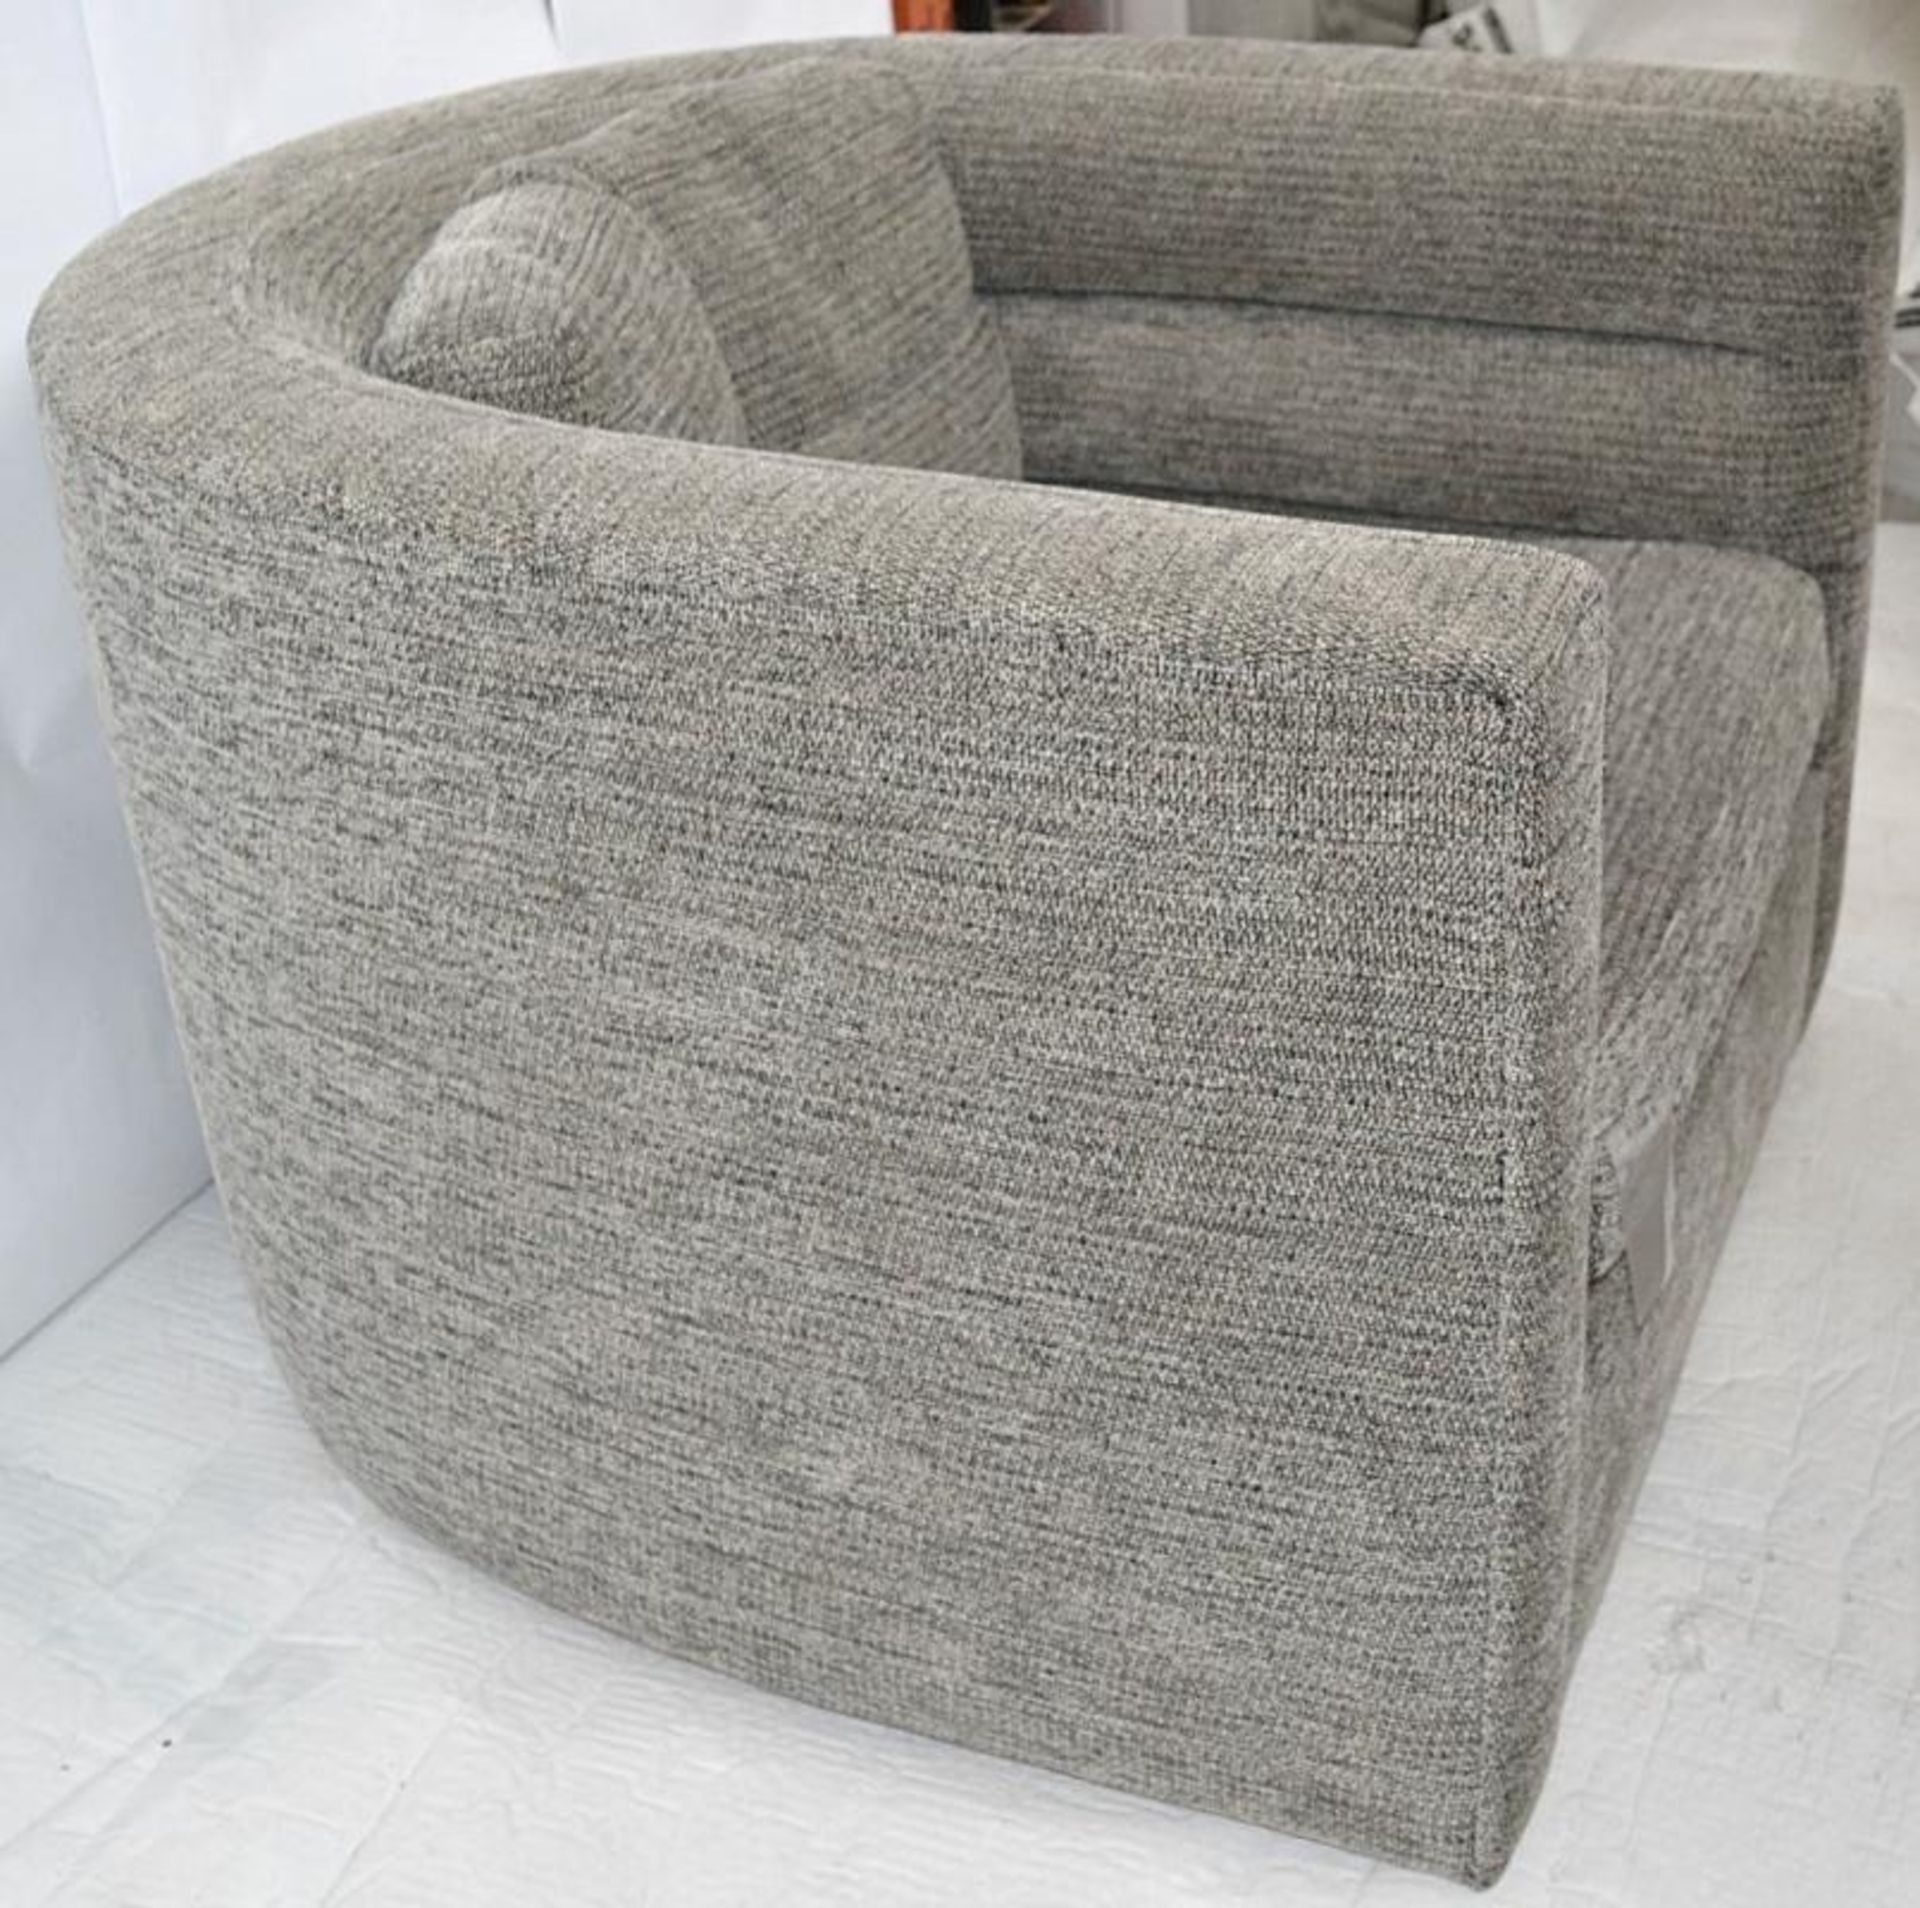 1 x KELLY WEARSTLER Melrose Club Chair In Grey - Dimensions: W36" x D38" x H28" - Ref: 5223289 - CL0 - Image 13 of 24